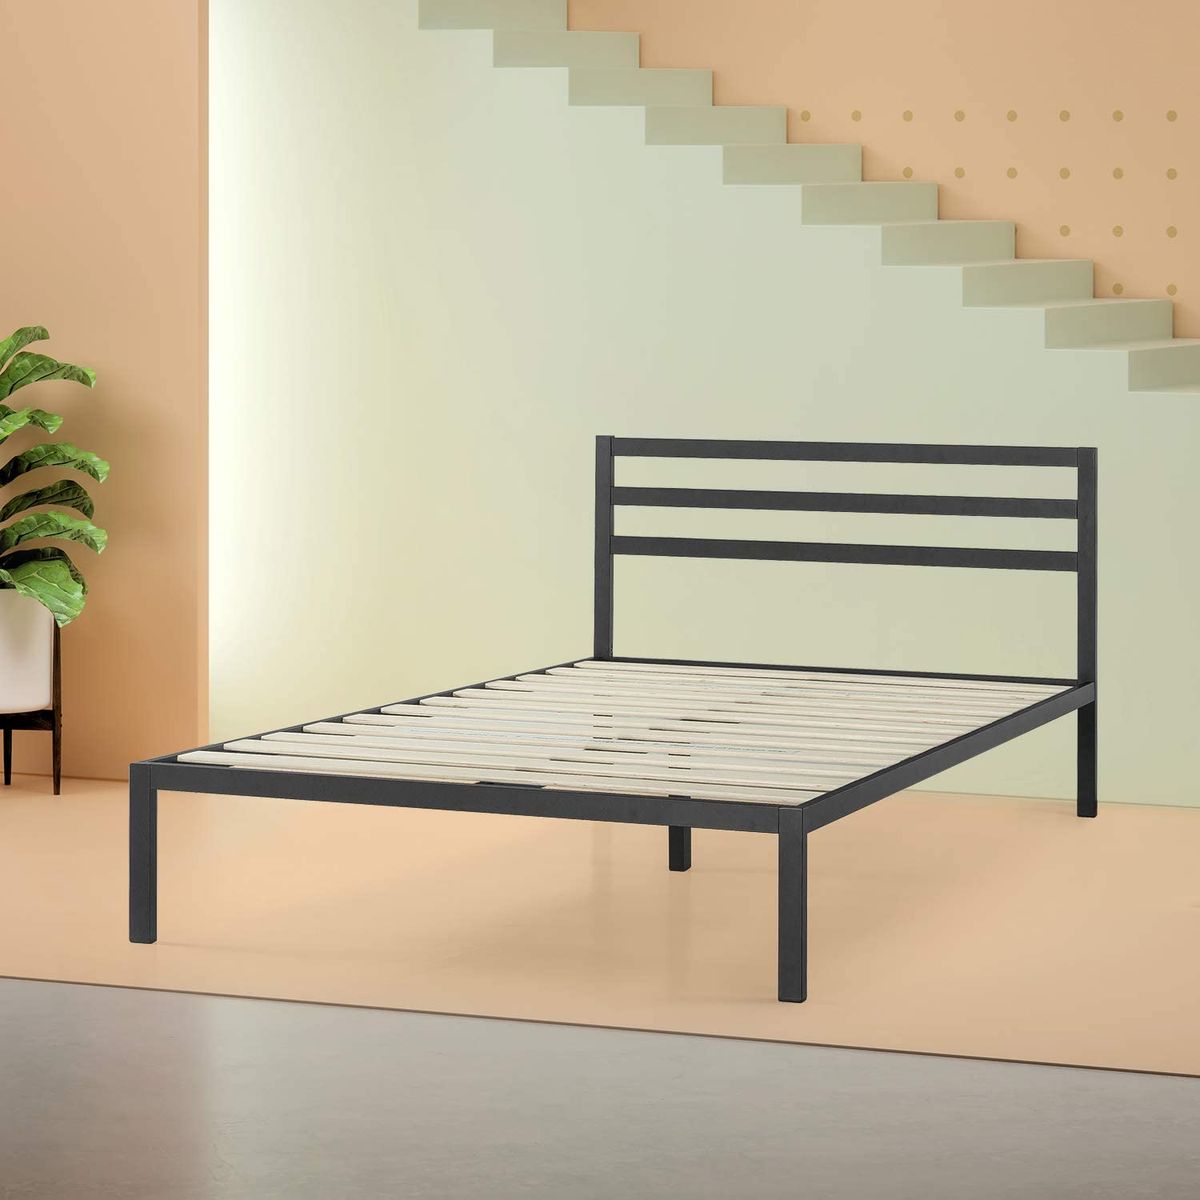 19 Best Metal Bed Frames 2022 The, How To Attach Headboard Metal Frame Without Holes